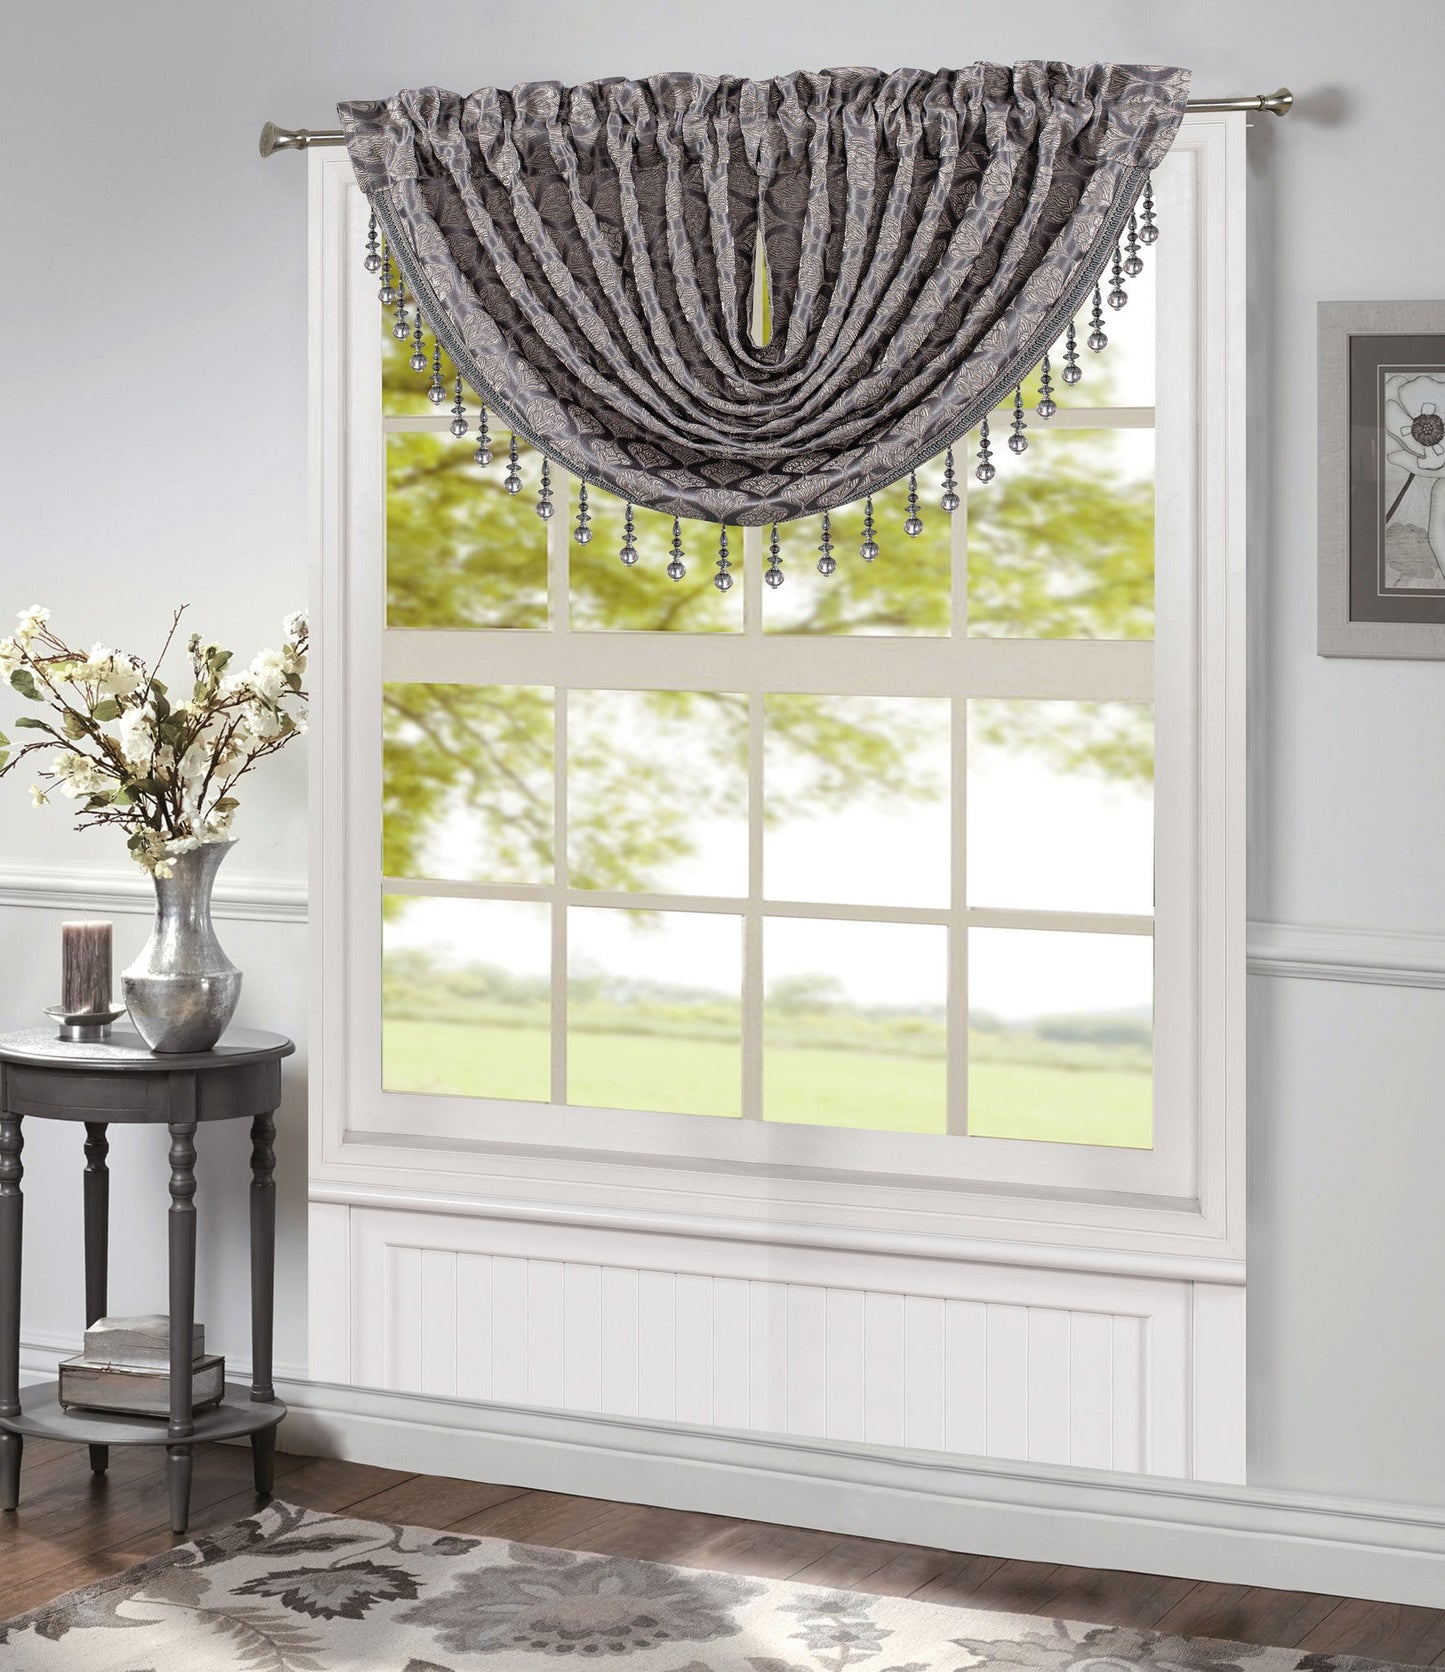 Robin Jacquard Rod Pocket Waterfall Window Valance with Beads, Silver/Grey, 48x37 Inches